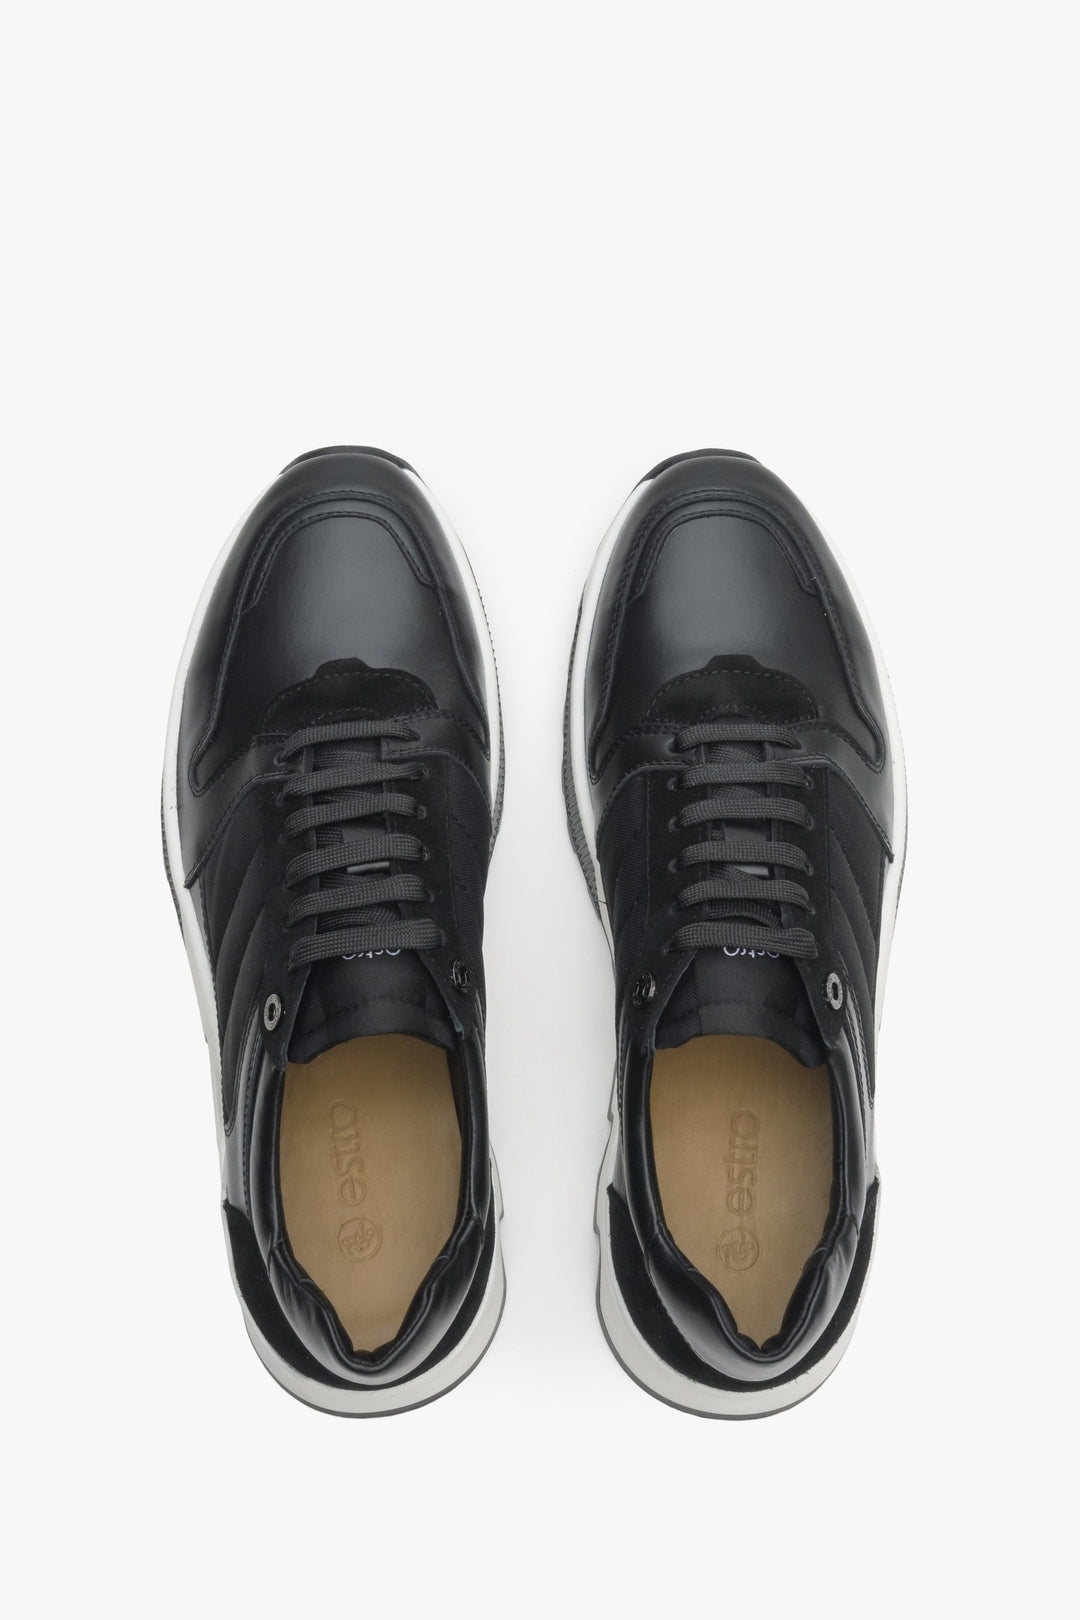 Men's sneakers made of velour and genuine leather by Estro - top view presentation of the model.